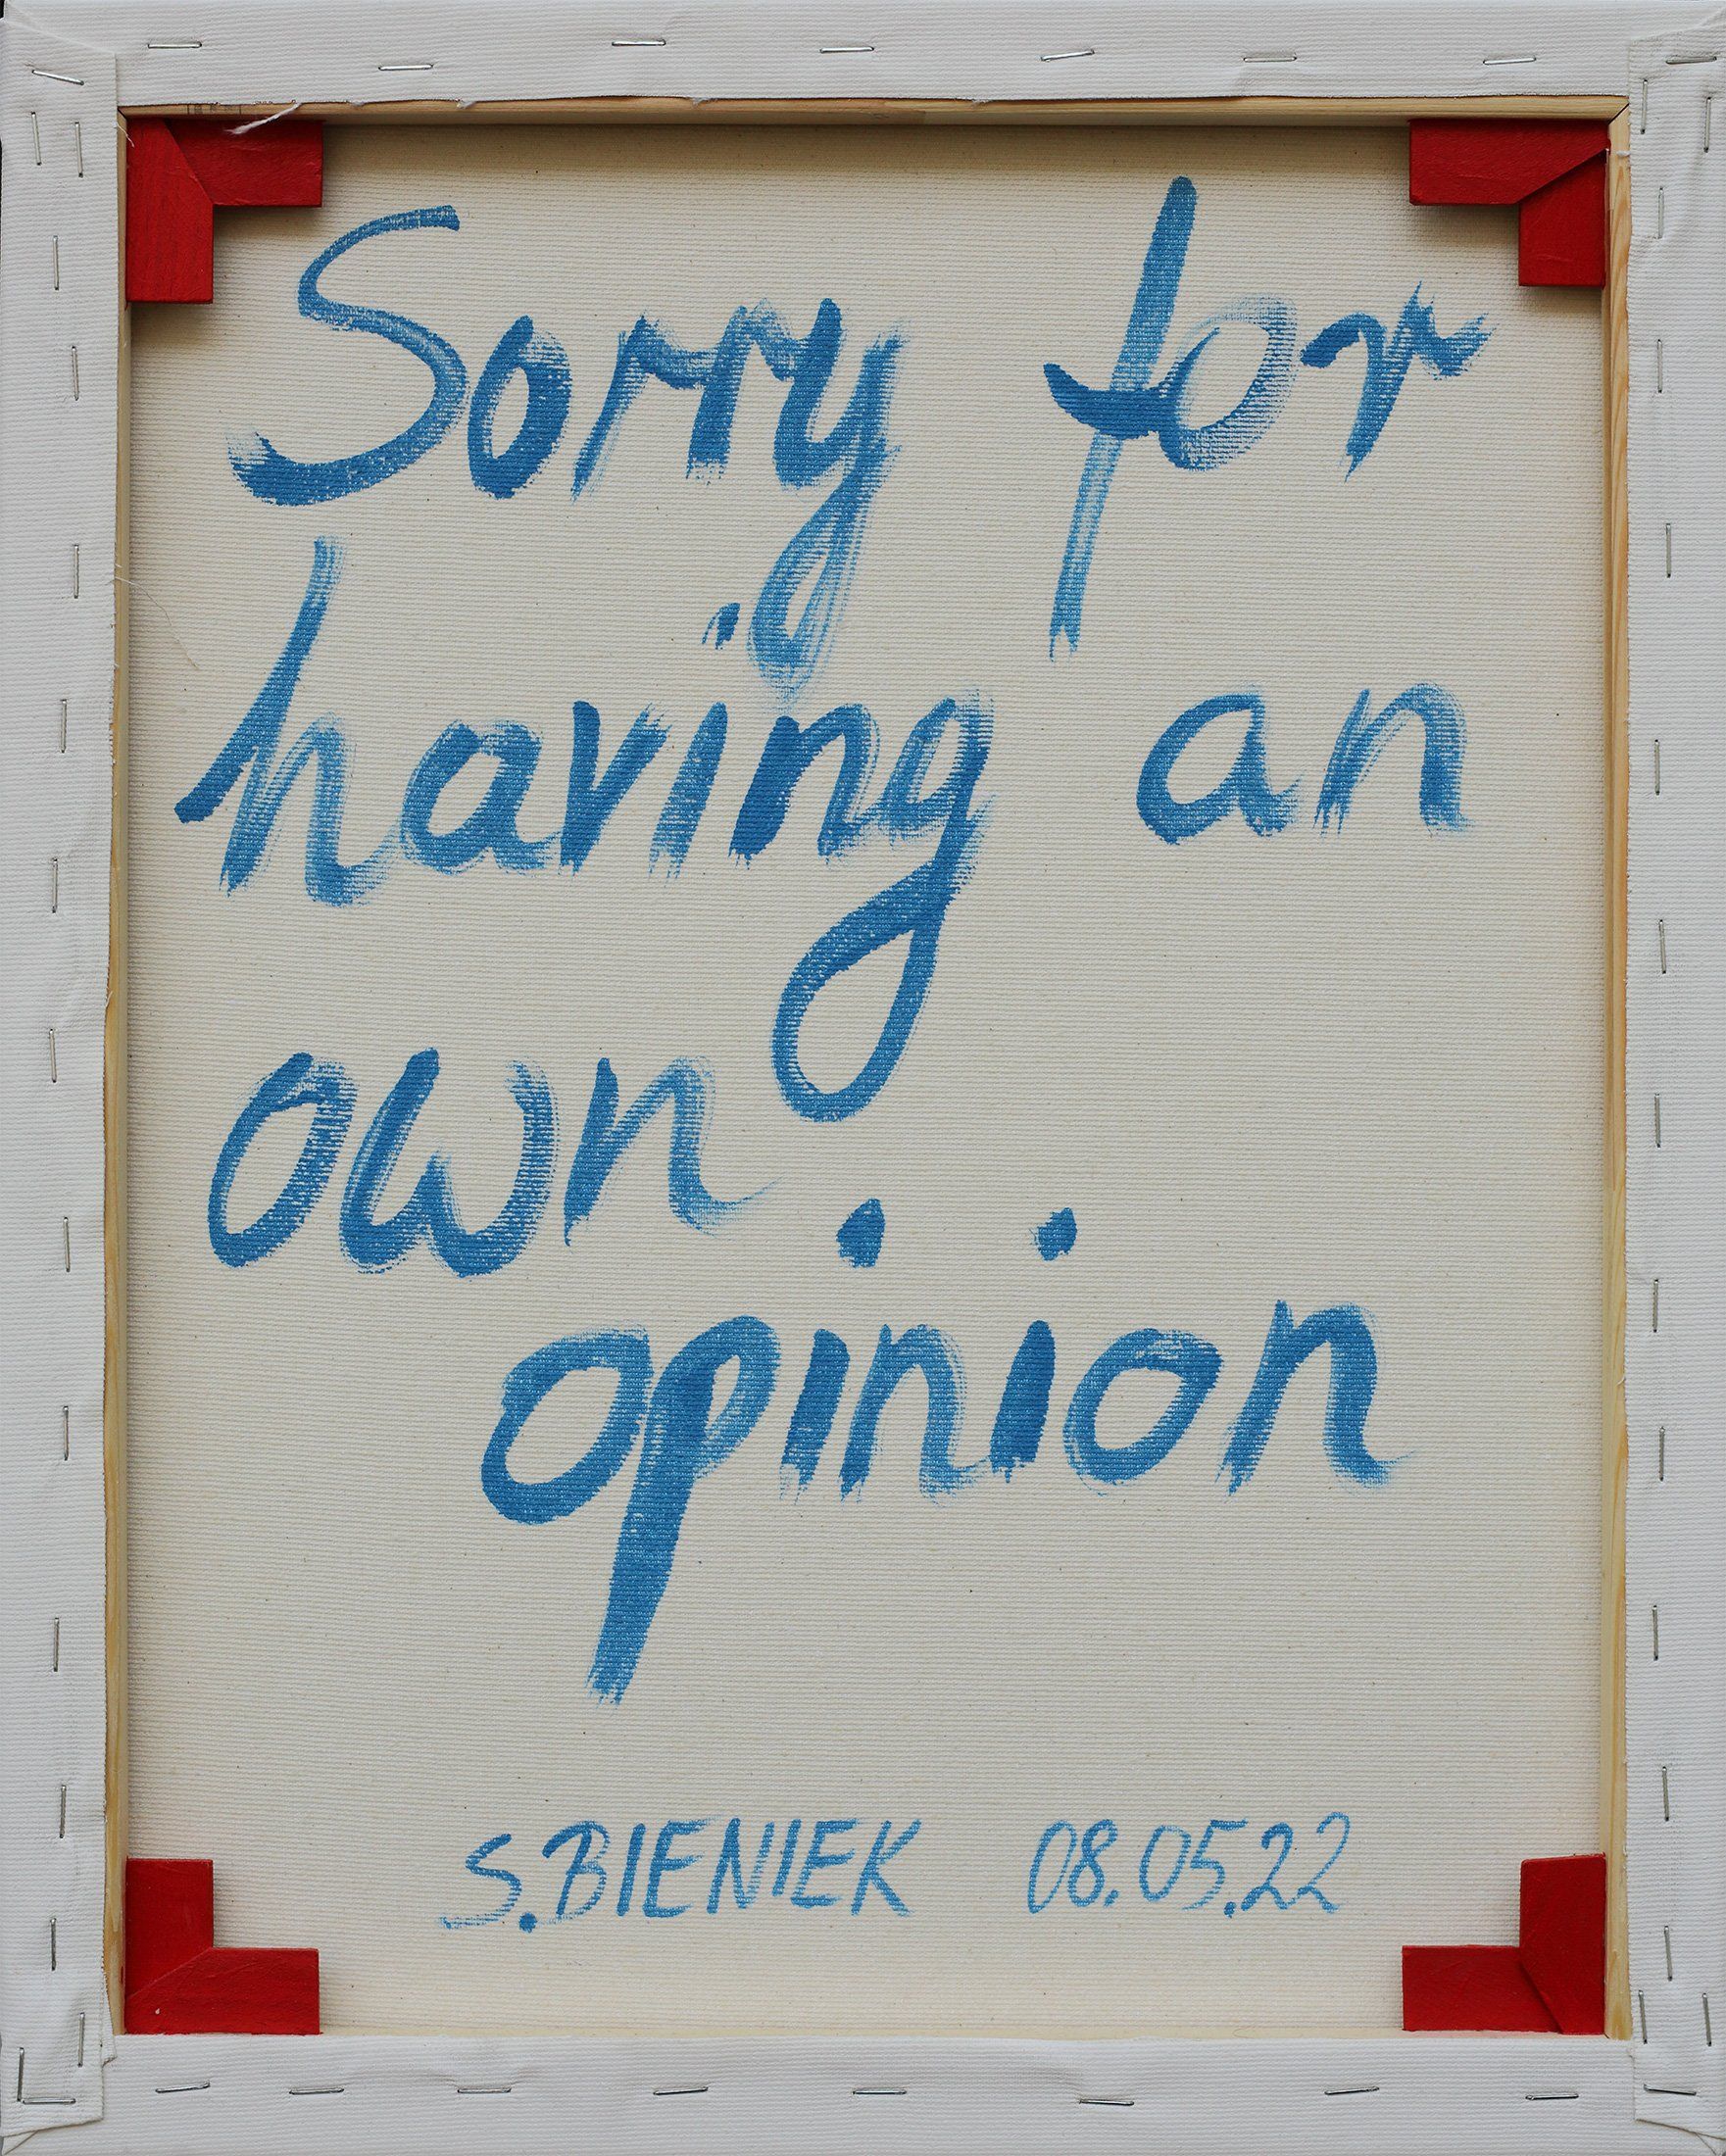 „Sorry for having an own opinion“. Painting from the series of 